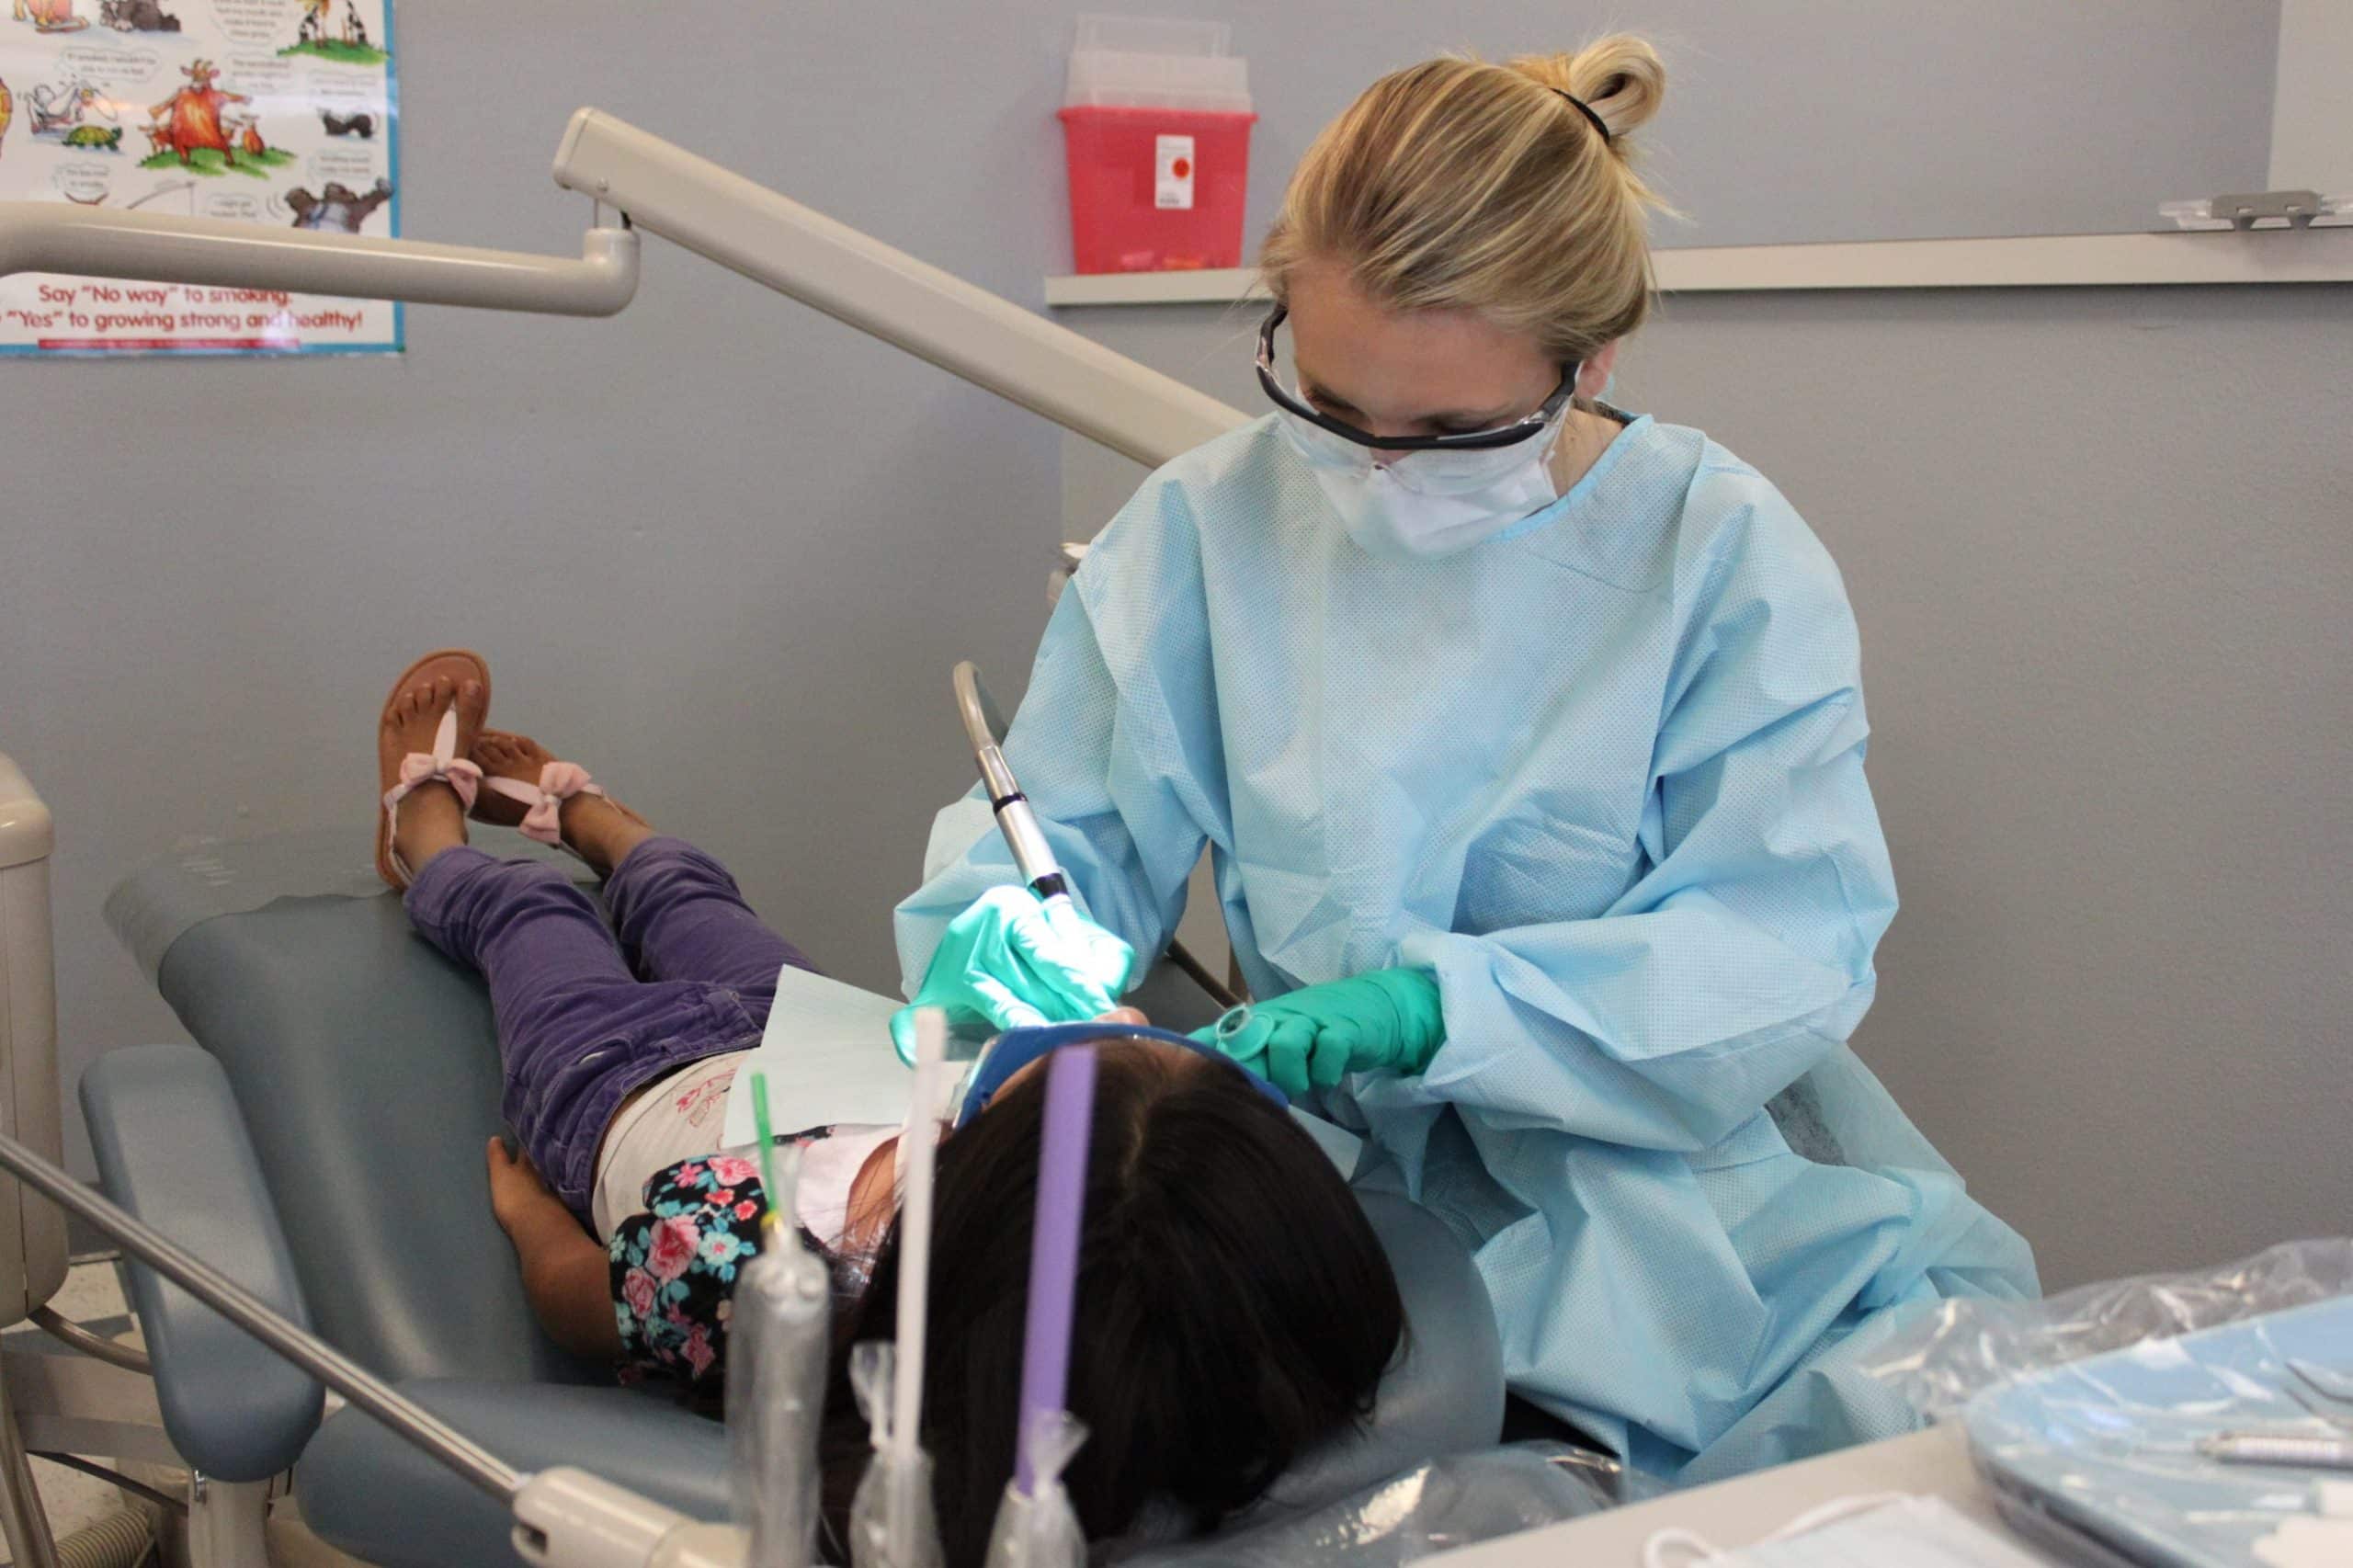 dental assisting student Julia Zevallos polishes teeth of a young patient